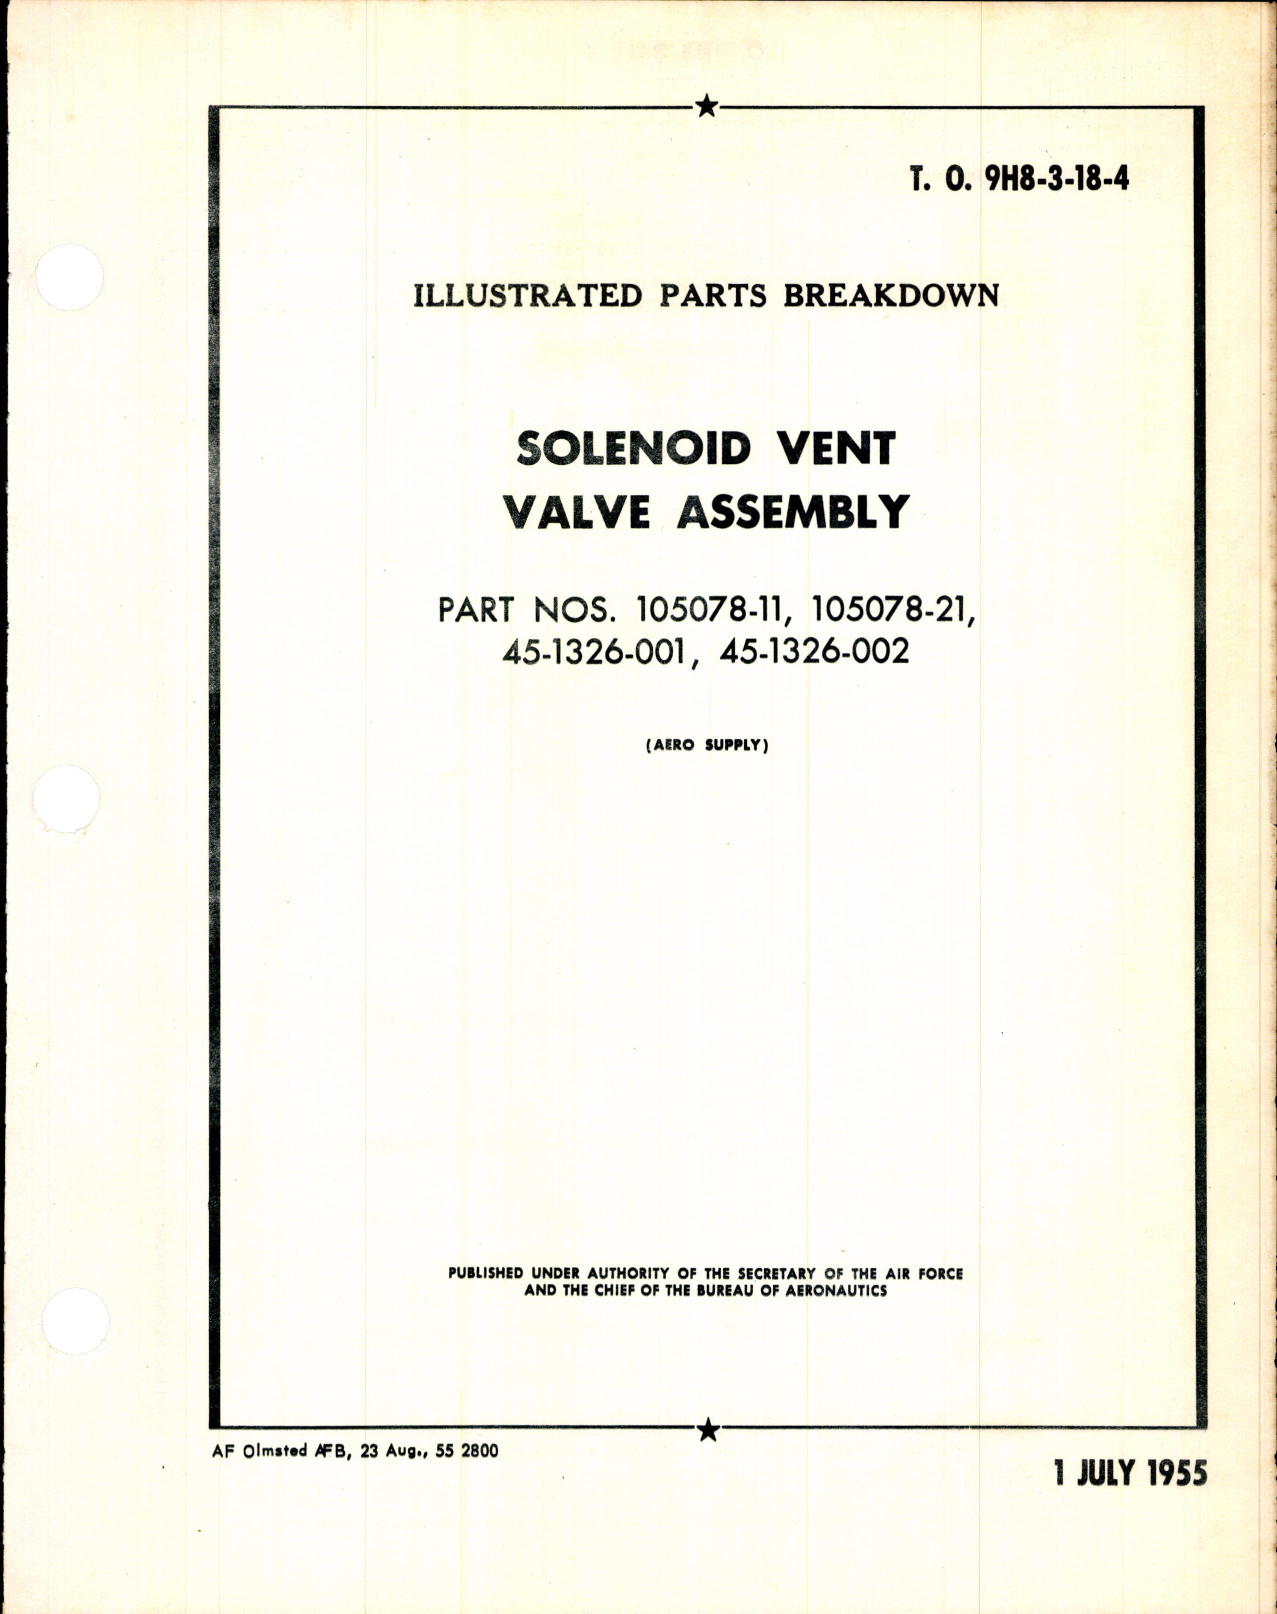 Sample page 1 from AirCorps Library document: Parts Breakdown for Solenoid Vent Valve Assembly